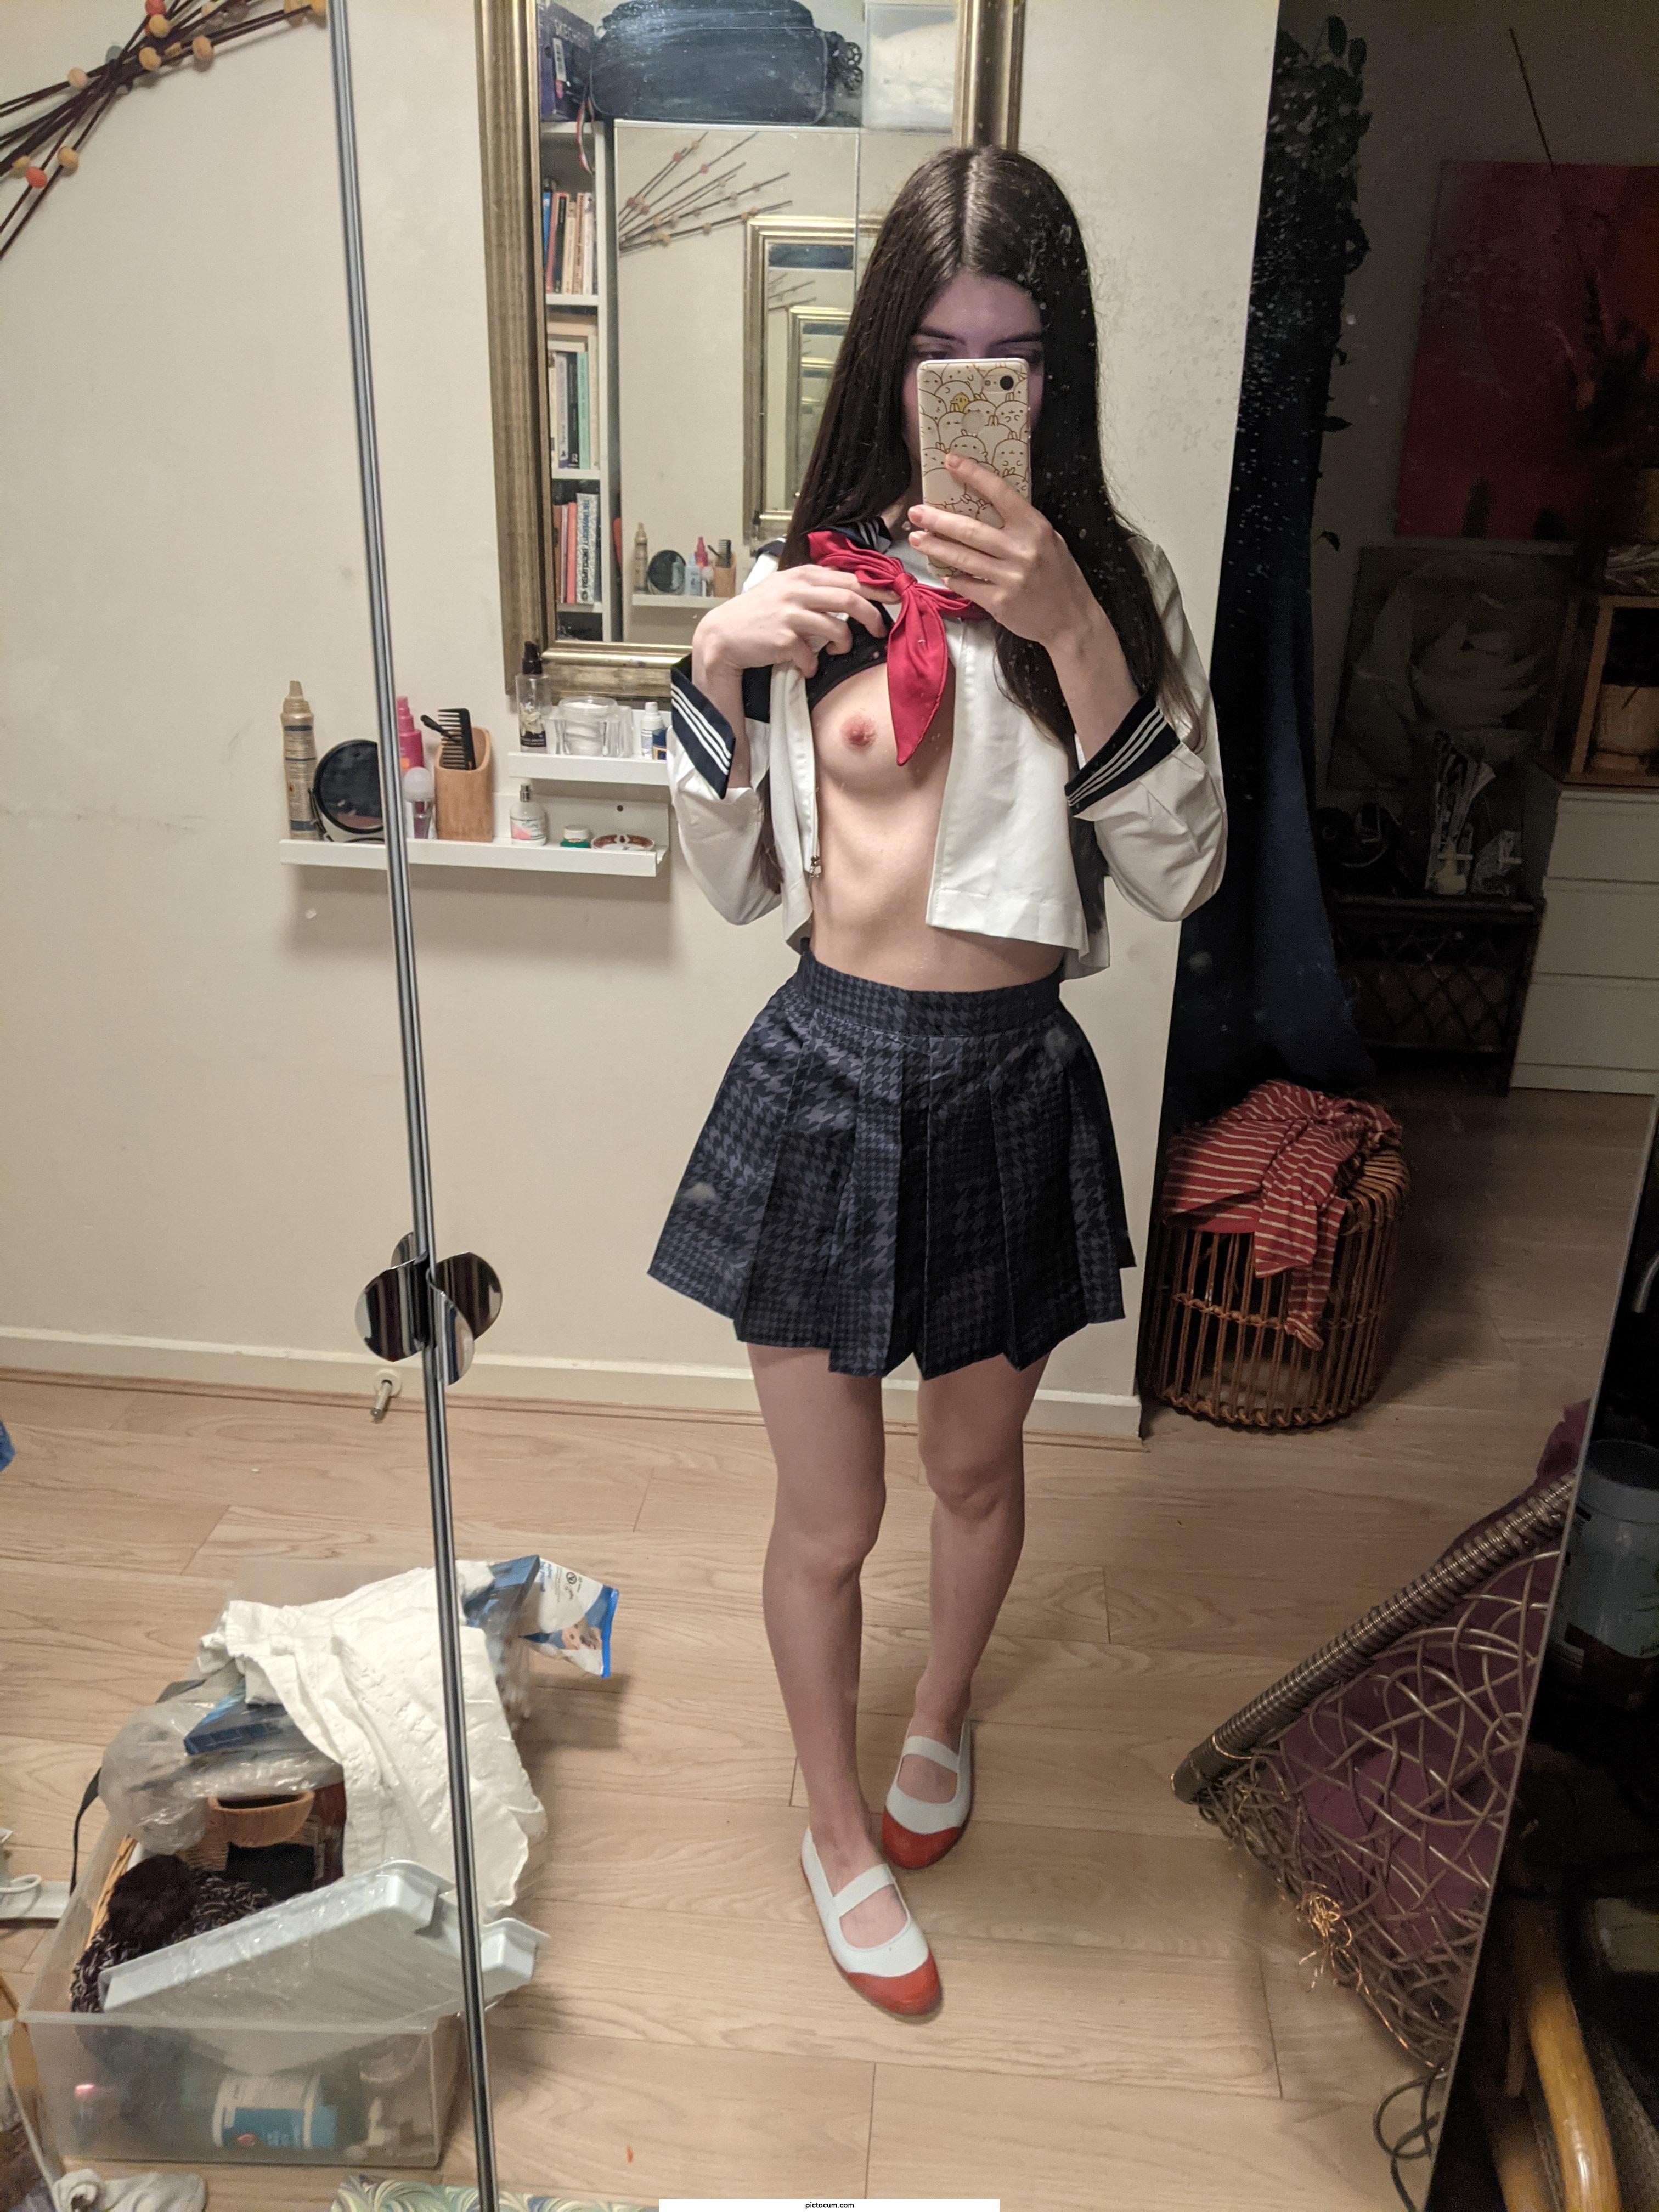 Would you fuck me in my uniform?